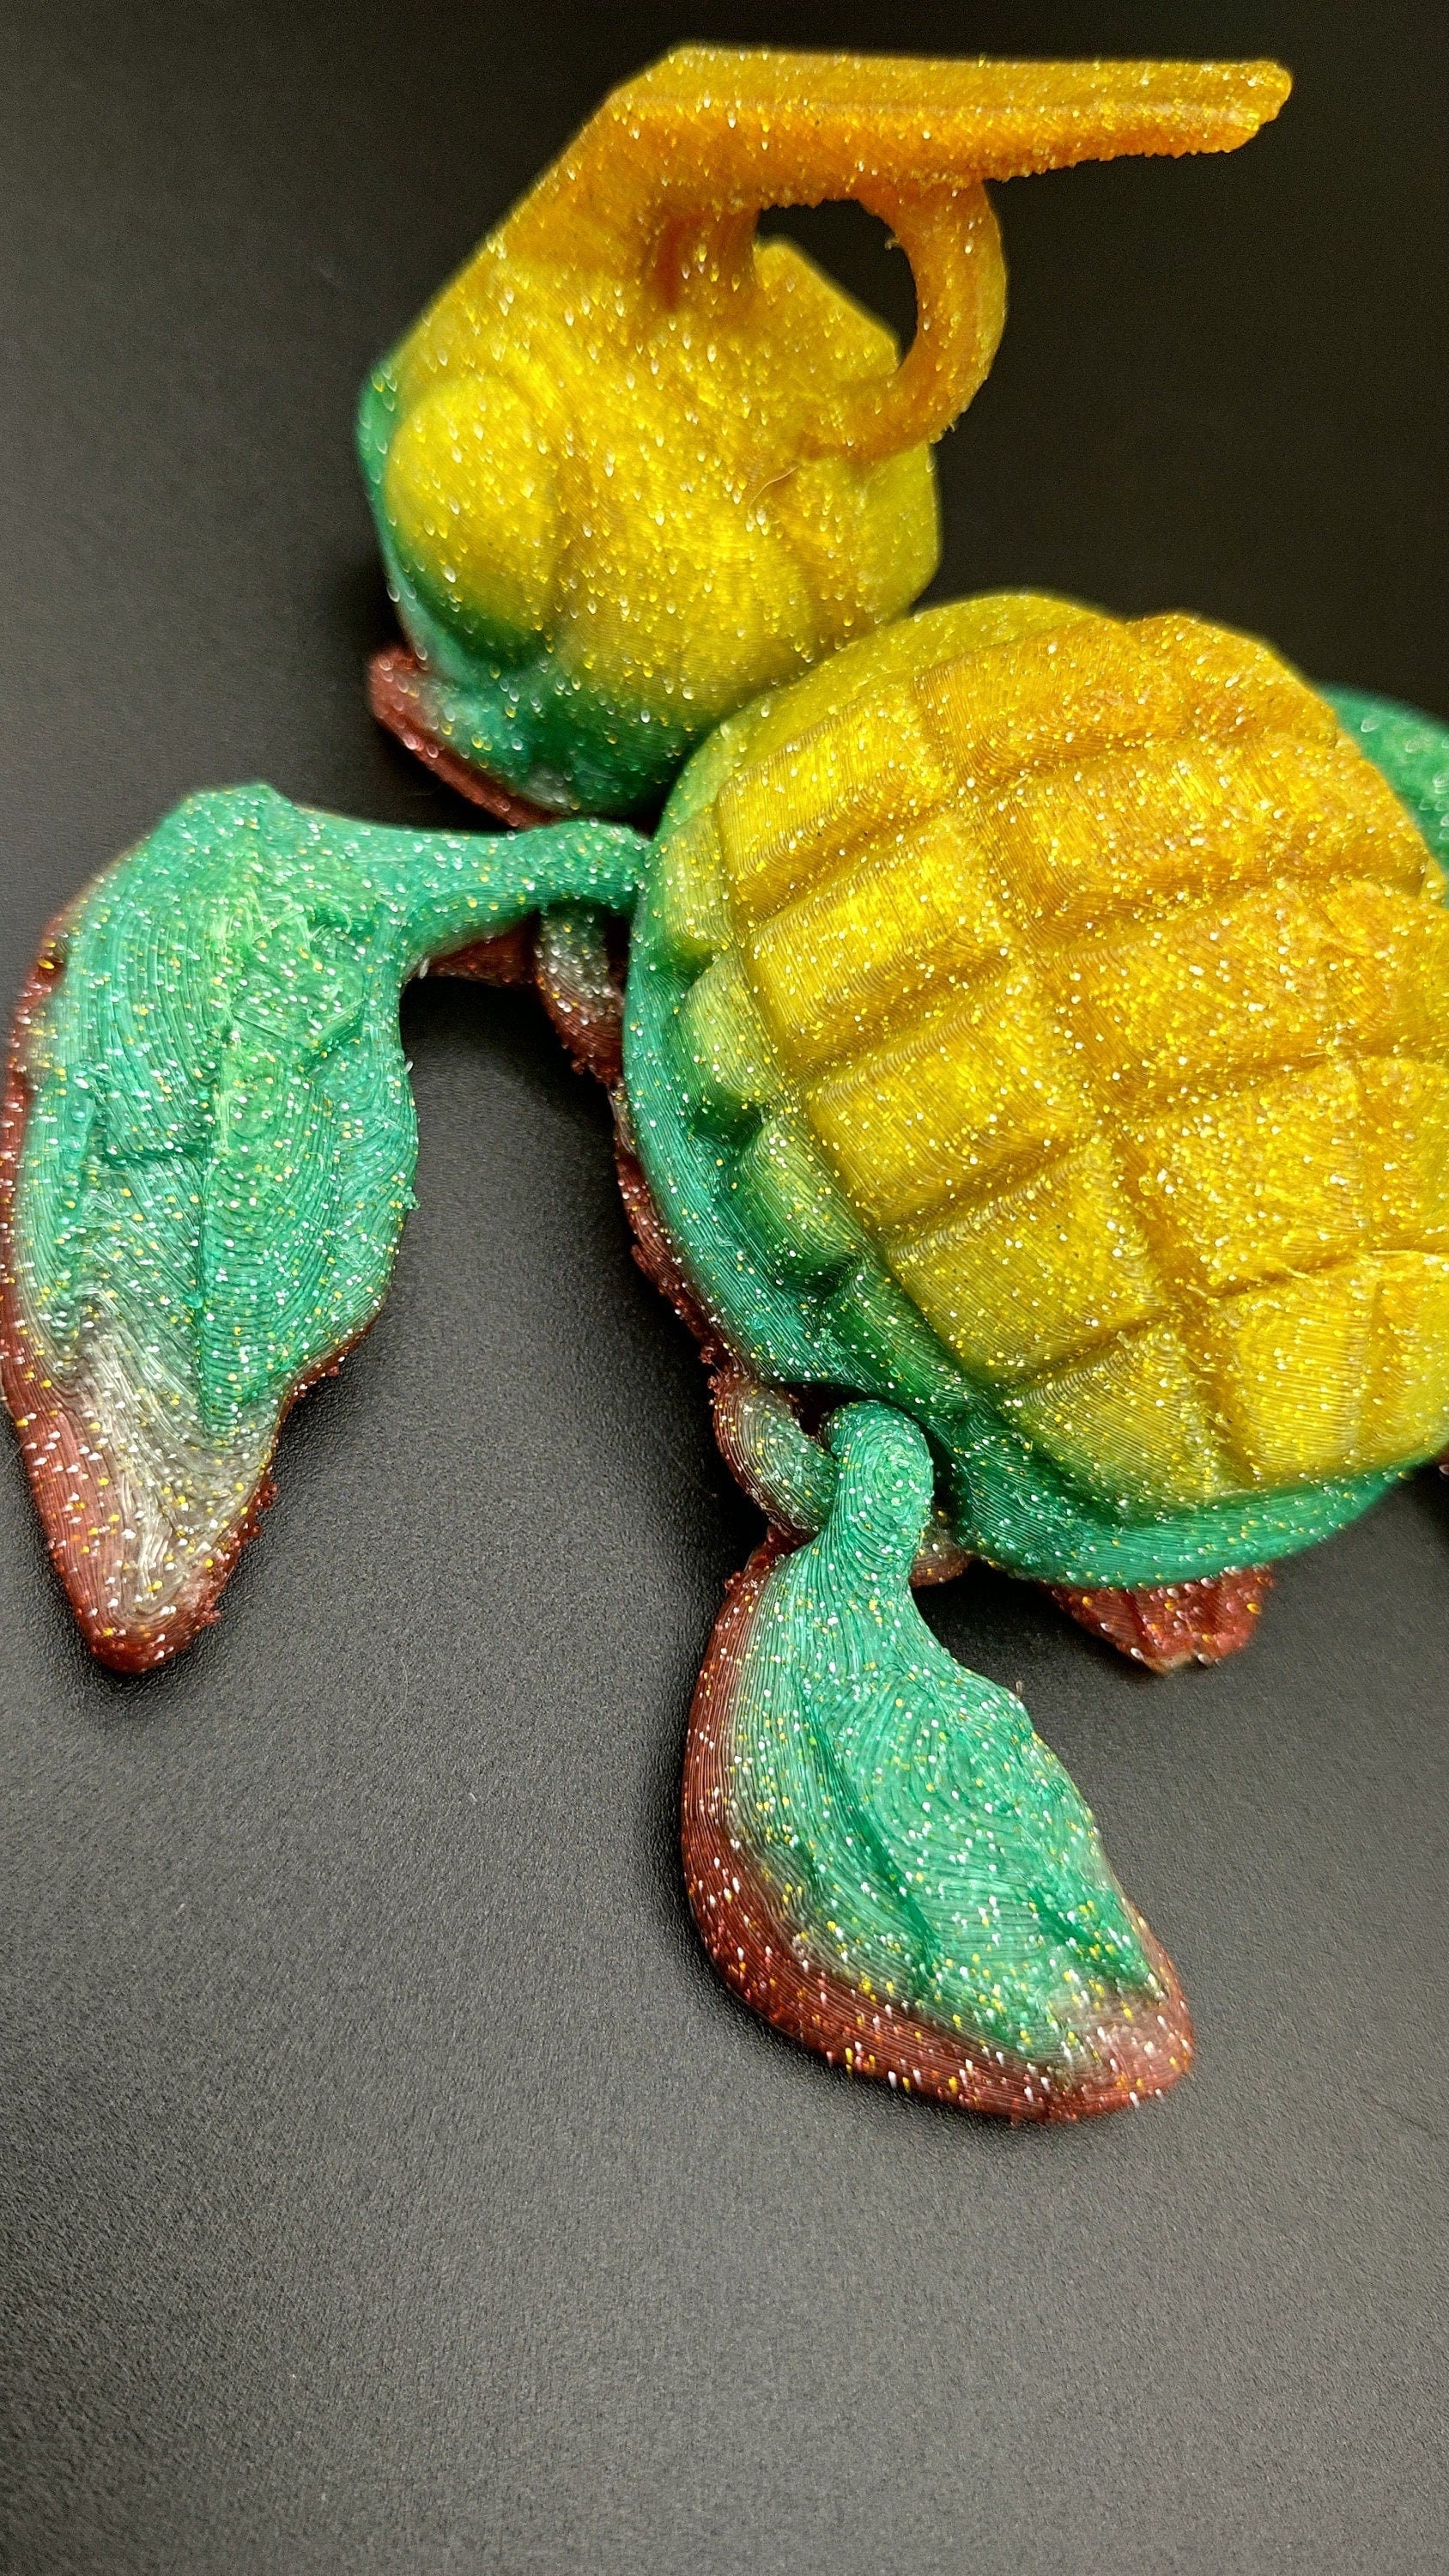 Sparkle Rainbow, (Red, Green, Yellow Gold,) Grenurtle, grenade / turtle 3d printed (made) adult desk fidget toy. Sensory turtle buddy.